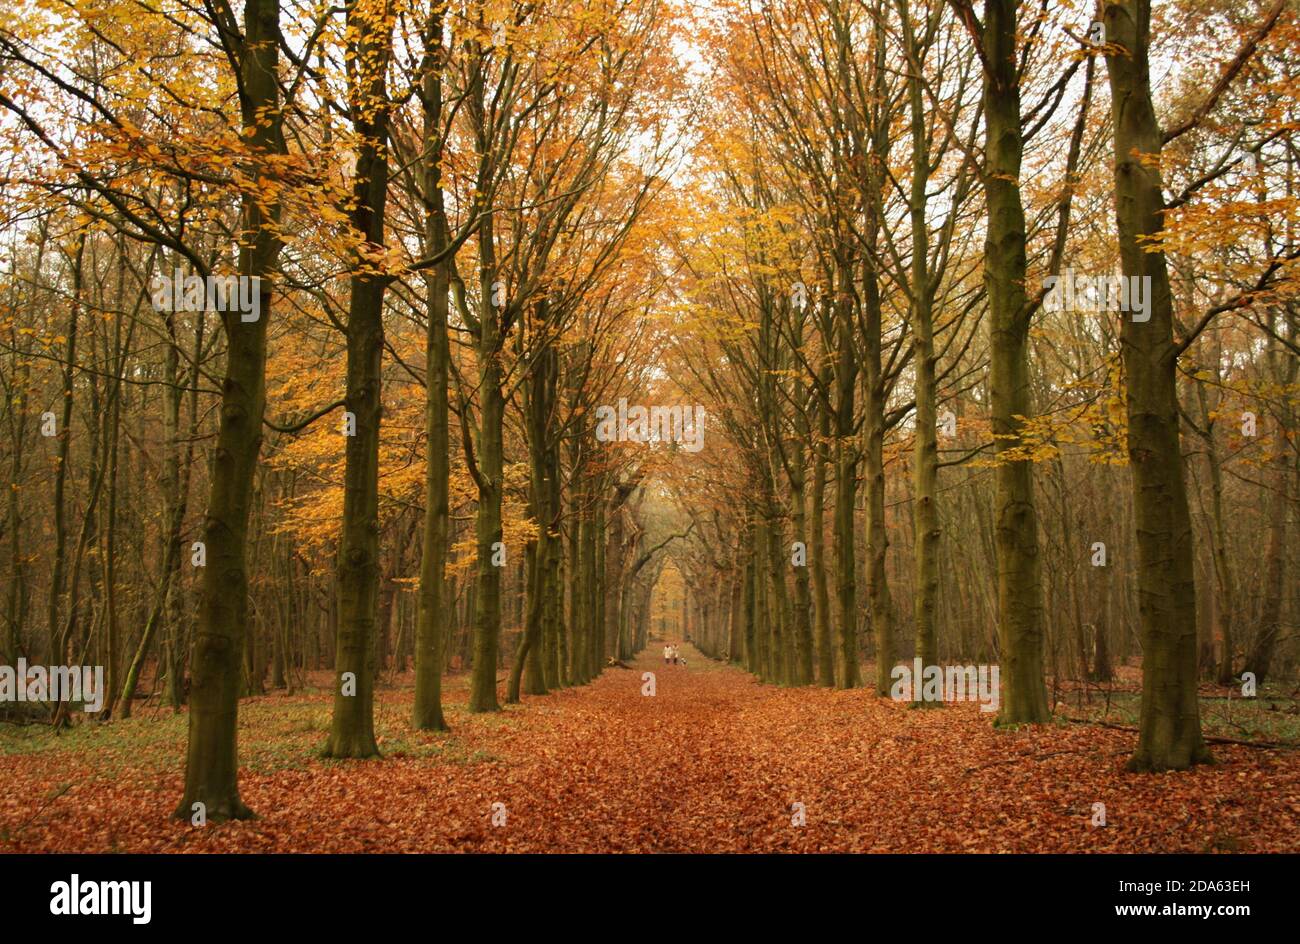 autumn lane lined with beech trees with two tiny figures in the distance, Leyduin, Netherlands Stock Photo